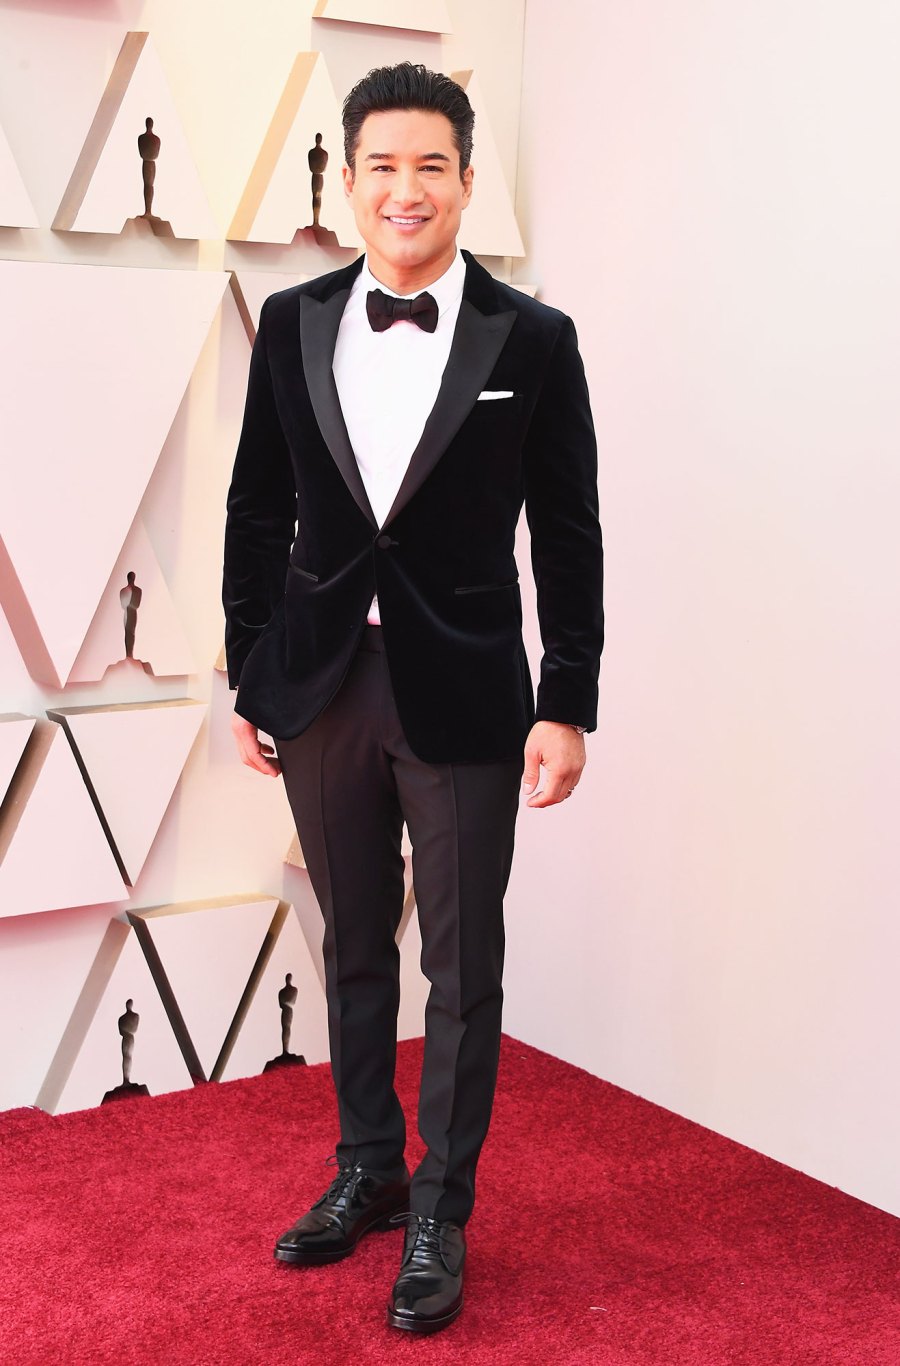 Mario Lopez Hottest Hunks at the 2019 Oscars